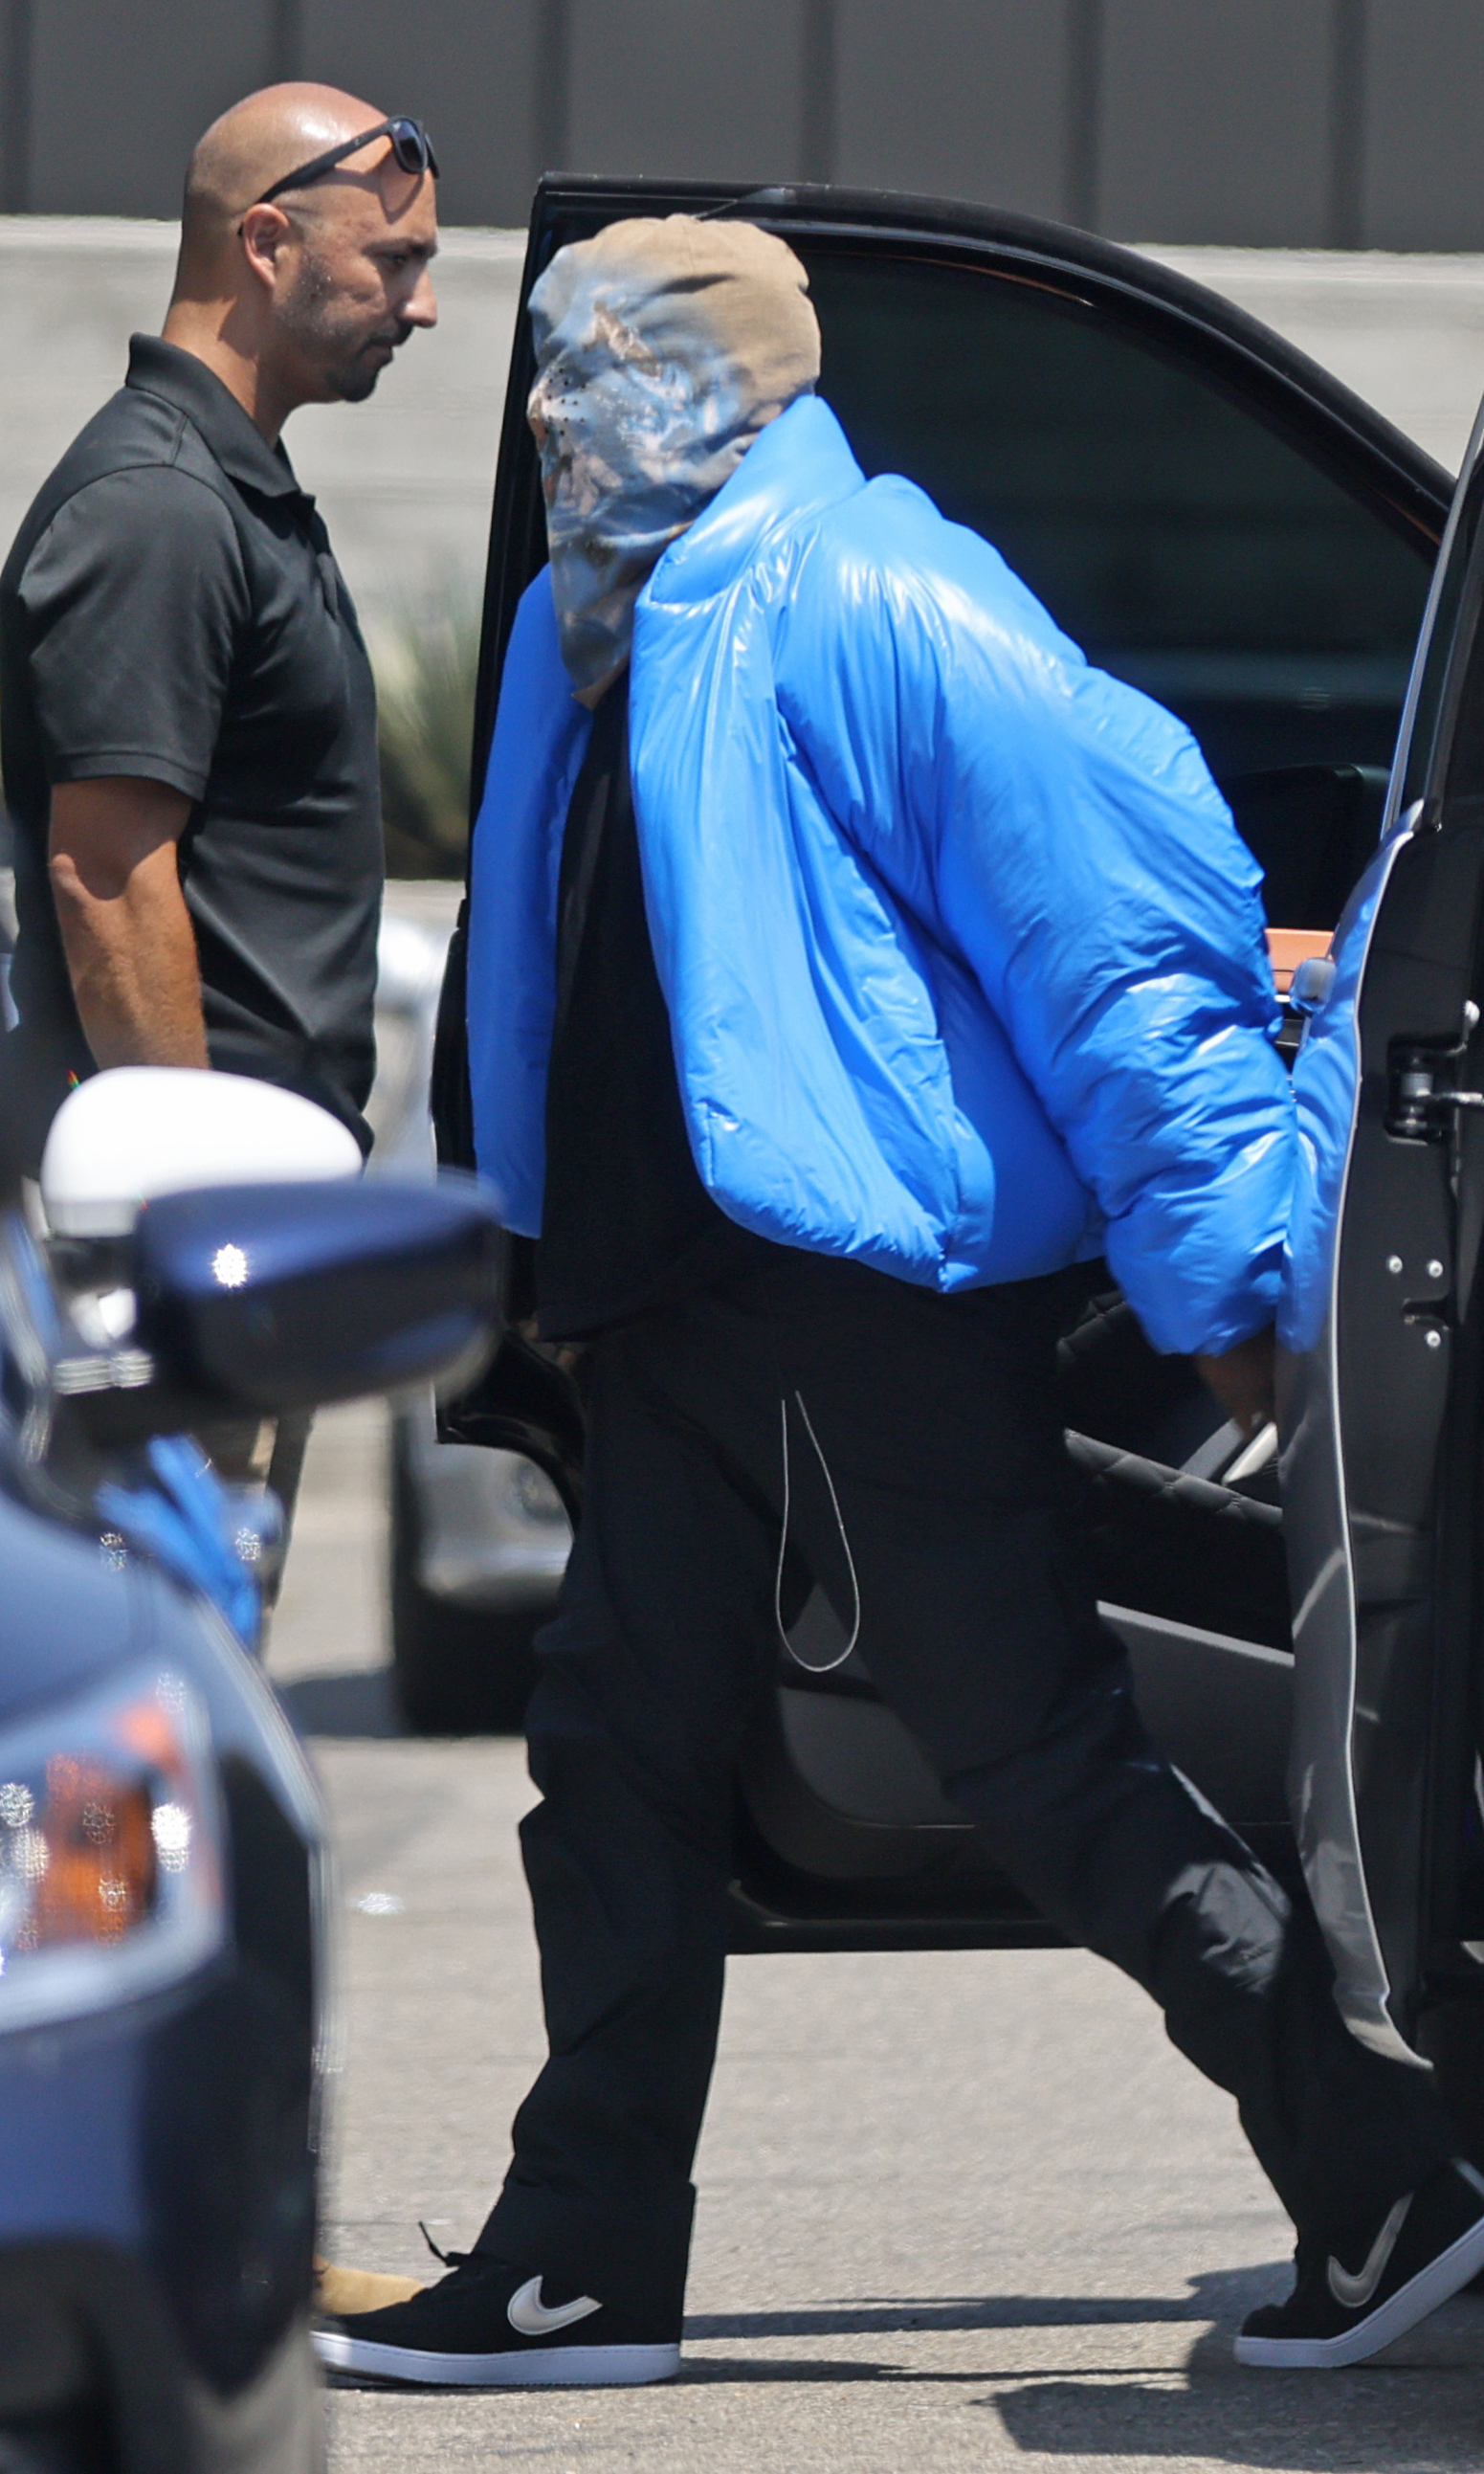 Kanye was spotted out without his wedding ring this week after his split from Kim